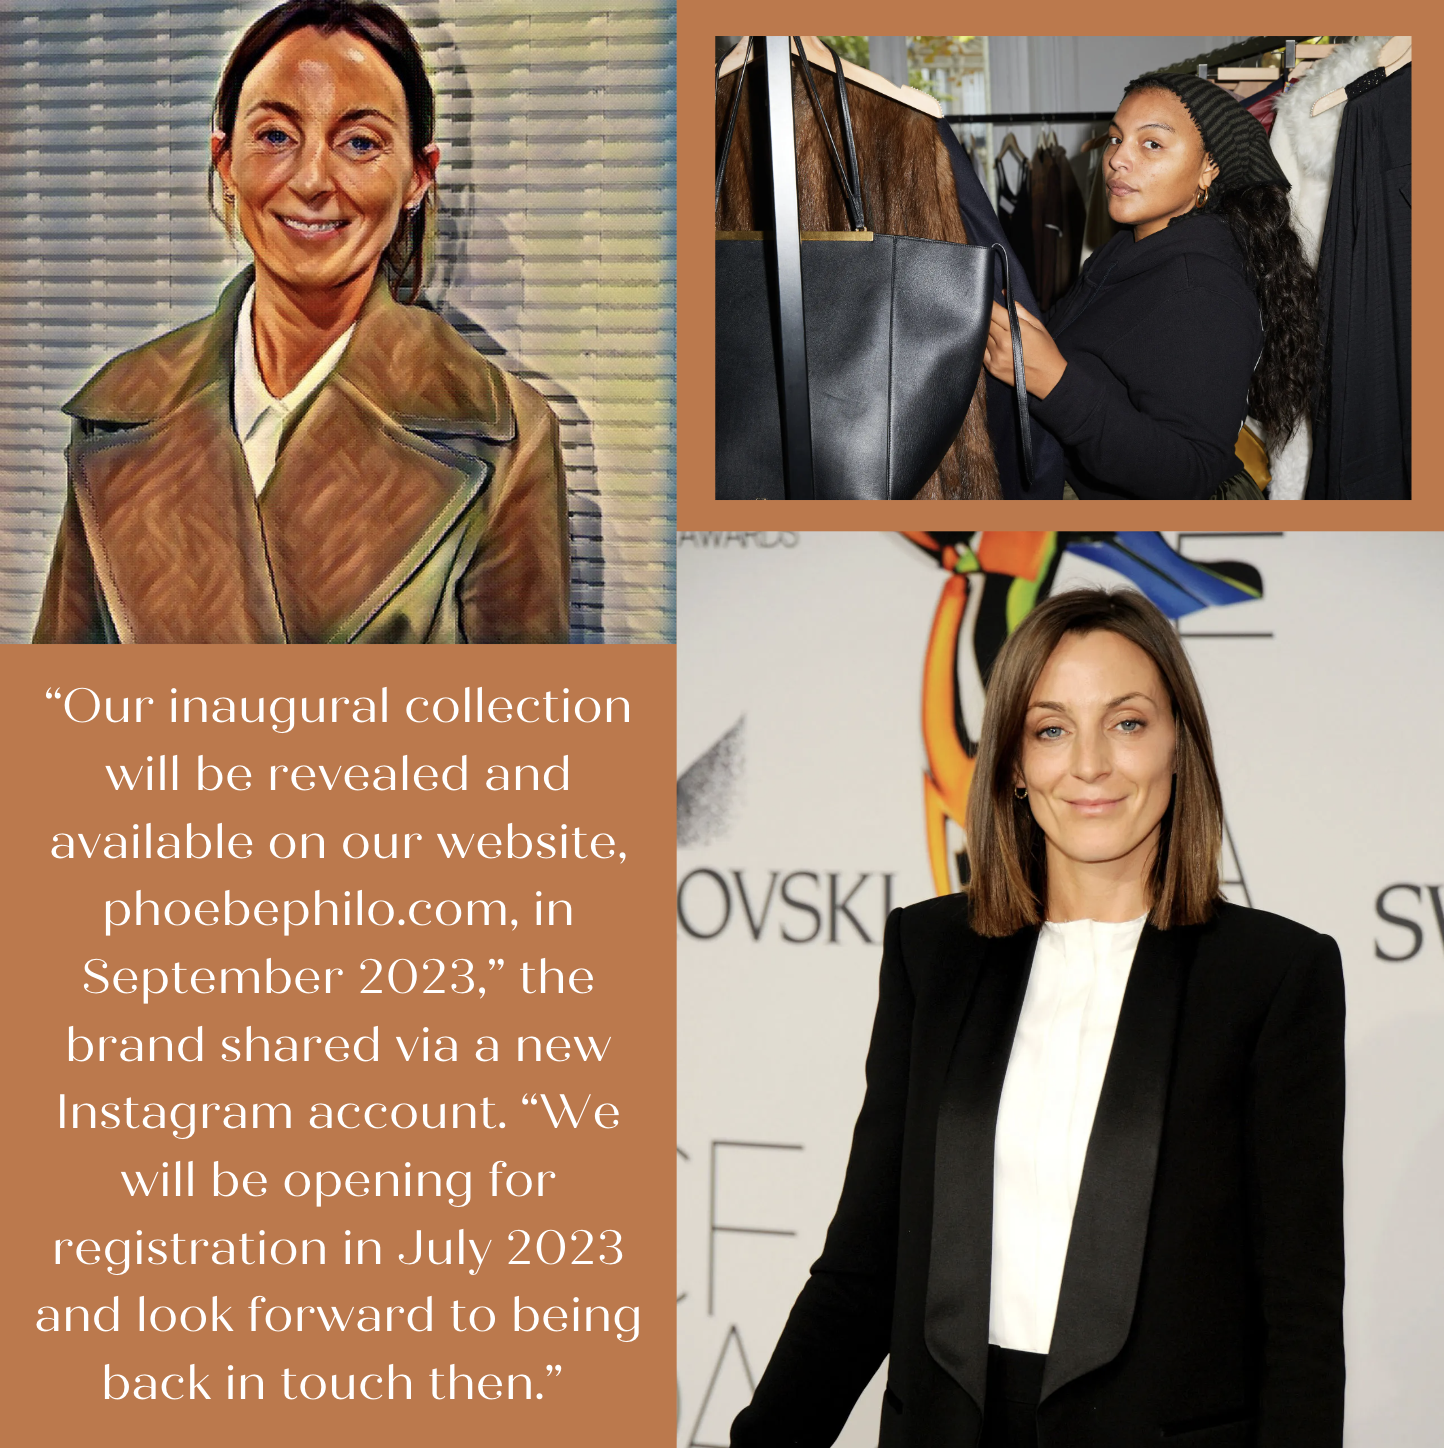 Phoebe Philo Returns in September 2023: Sound the Trumpets! — Anne